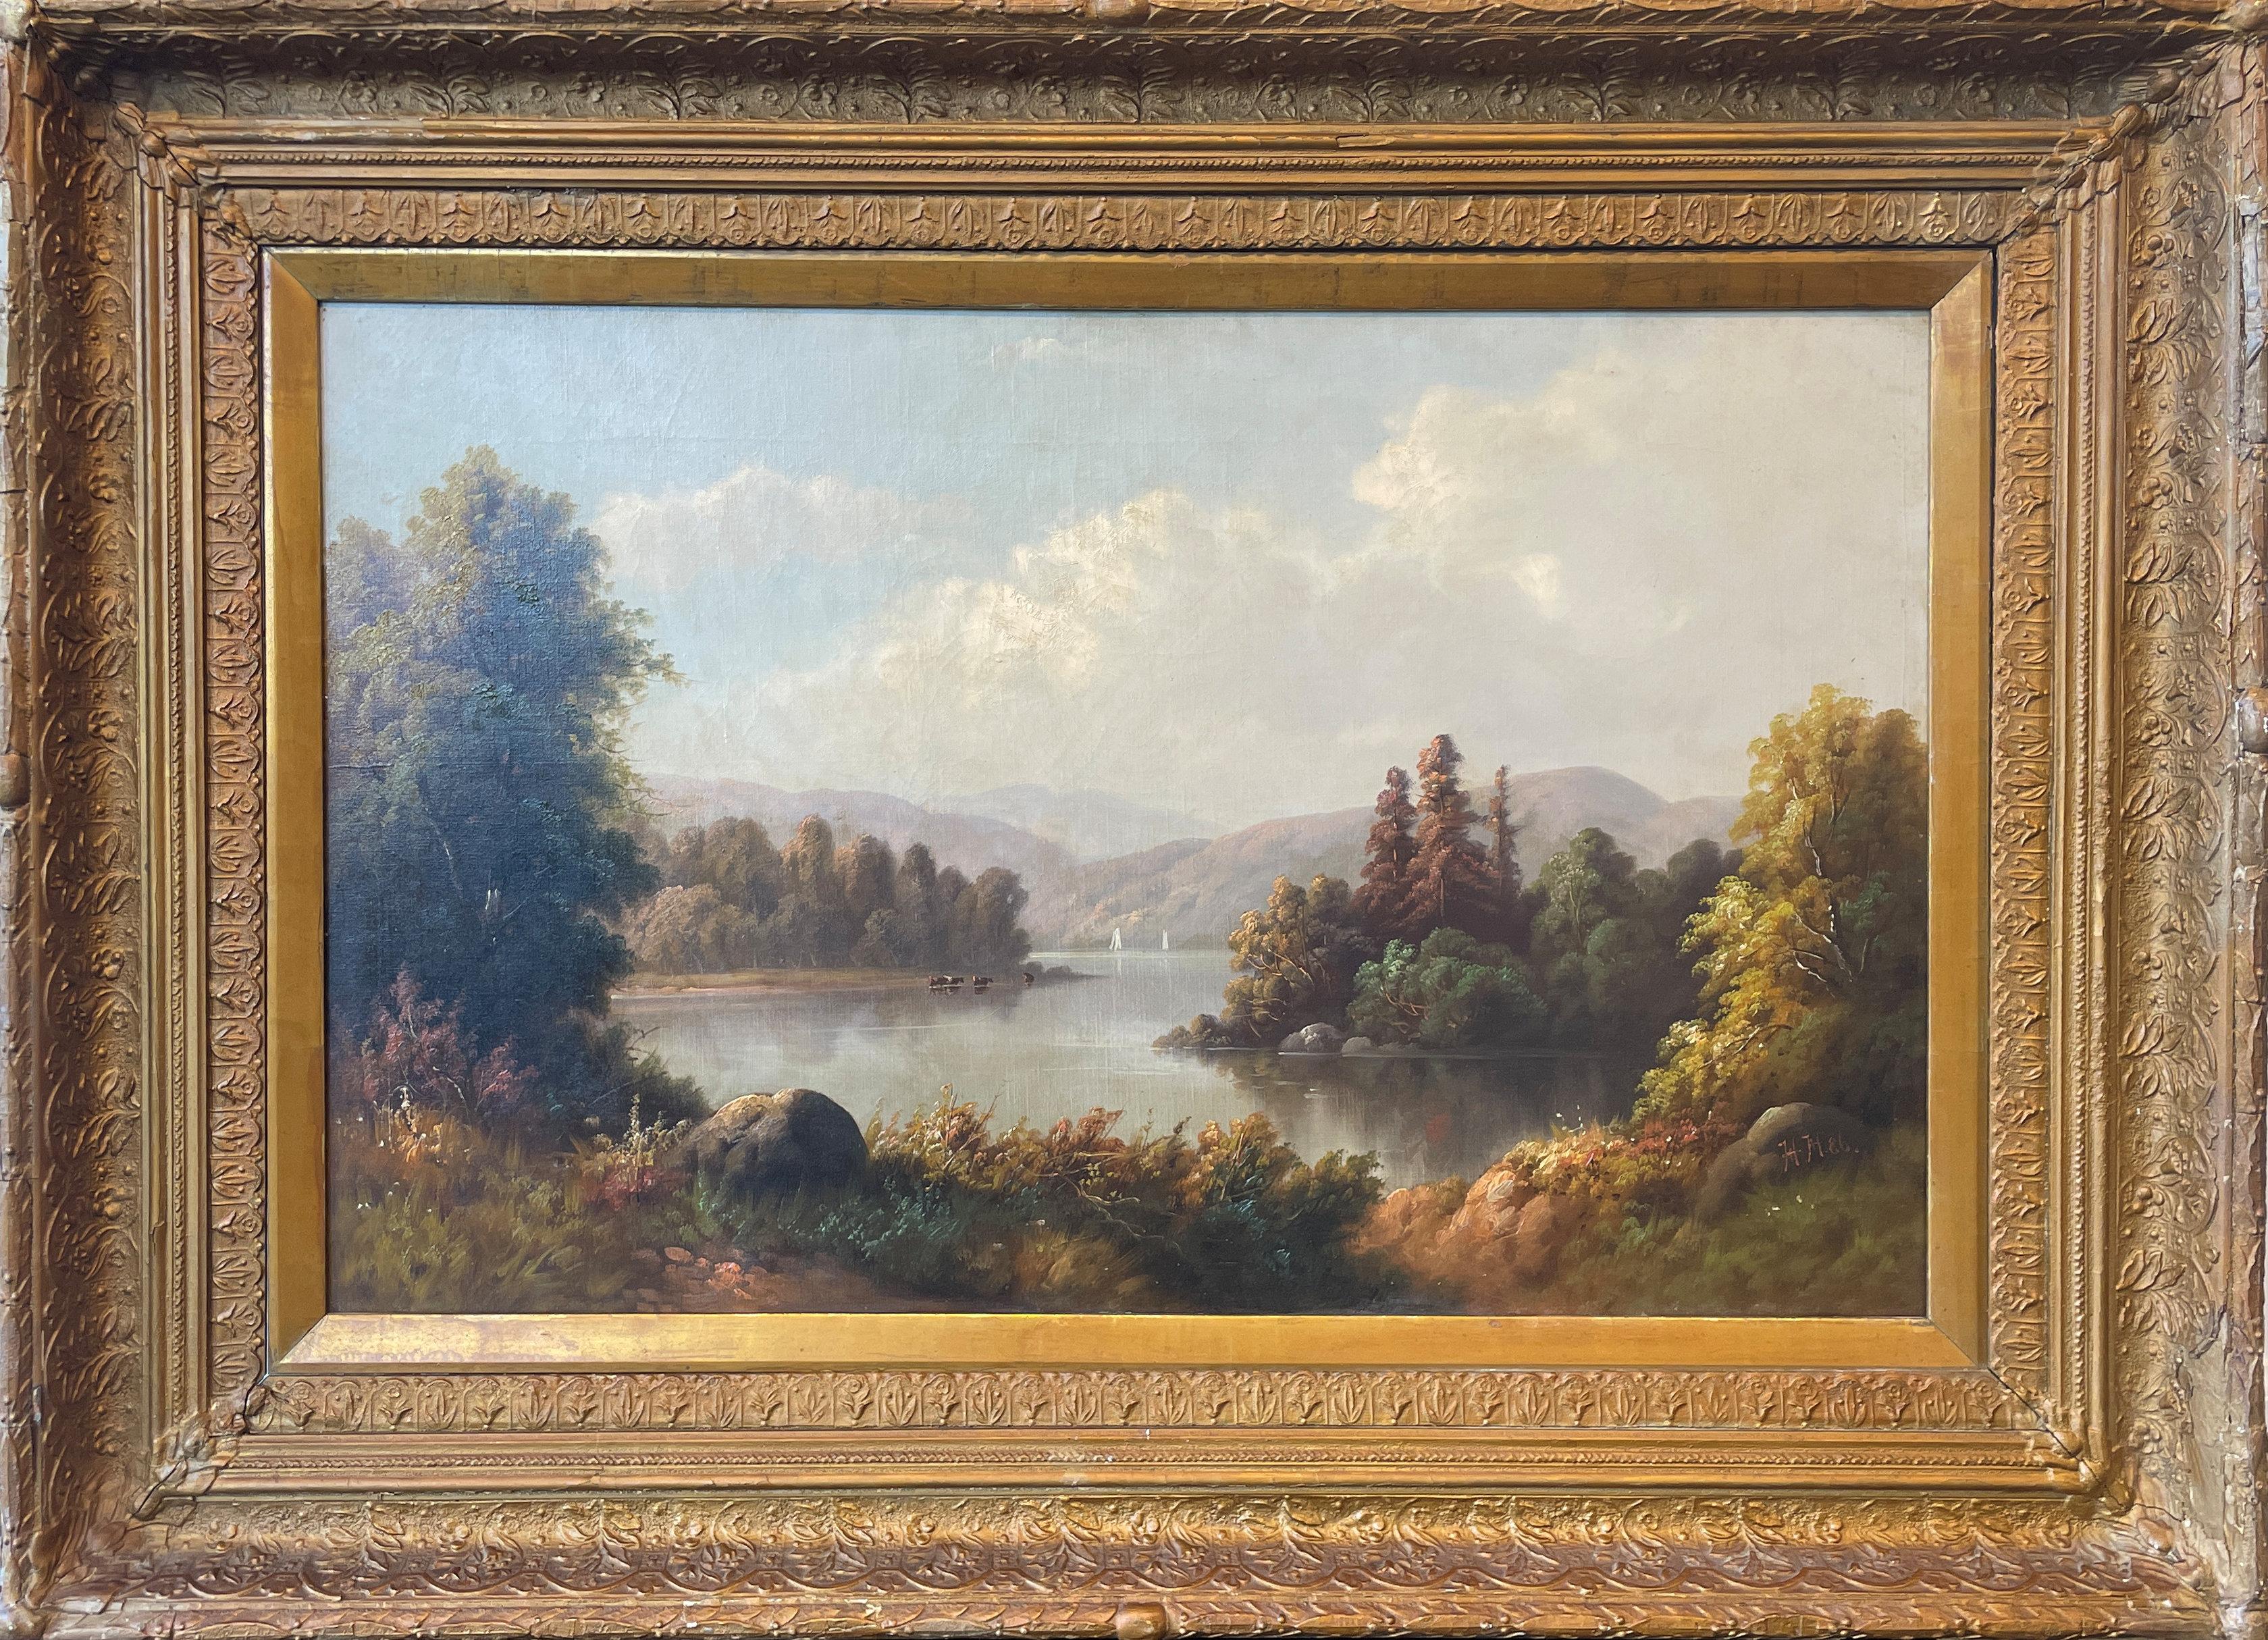 Hamilton Hamilton
Lake Landscape, 1886
Initialed and dated lower right
Oil on canvas
22 x 36 inches

Of Scottish descent and born in Oxford, England, Hamilton Hamilton became a renowned American landscape and portrait painter and illustrator. He